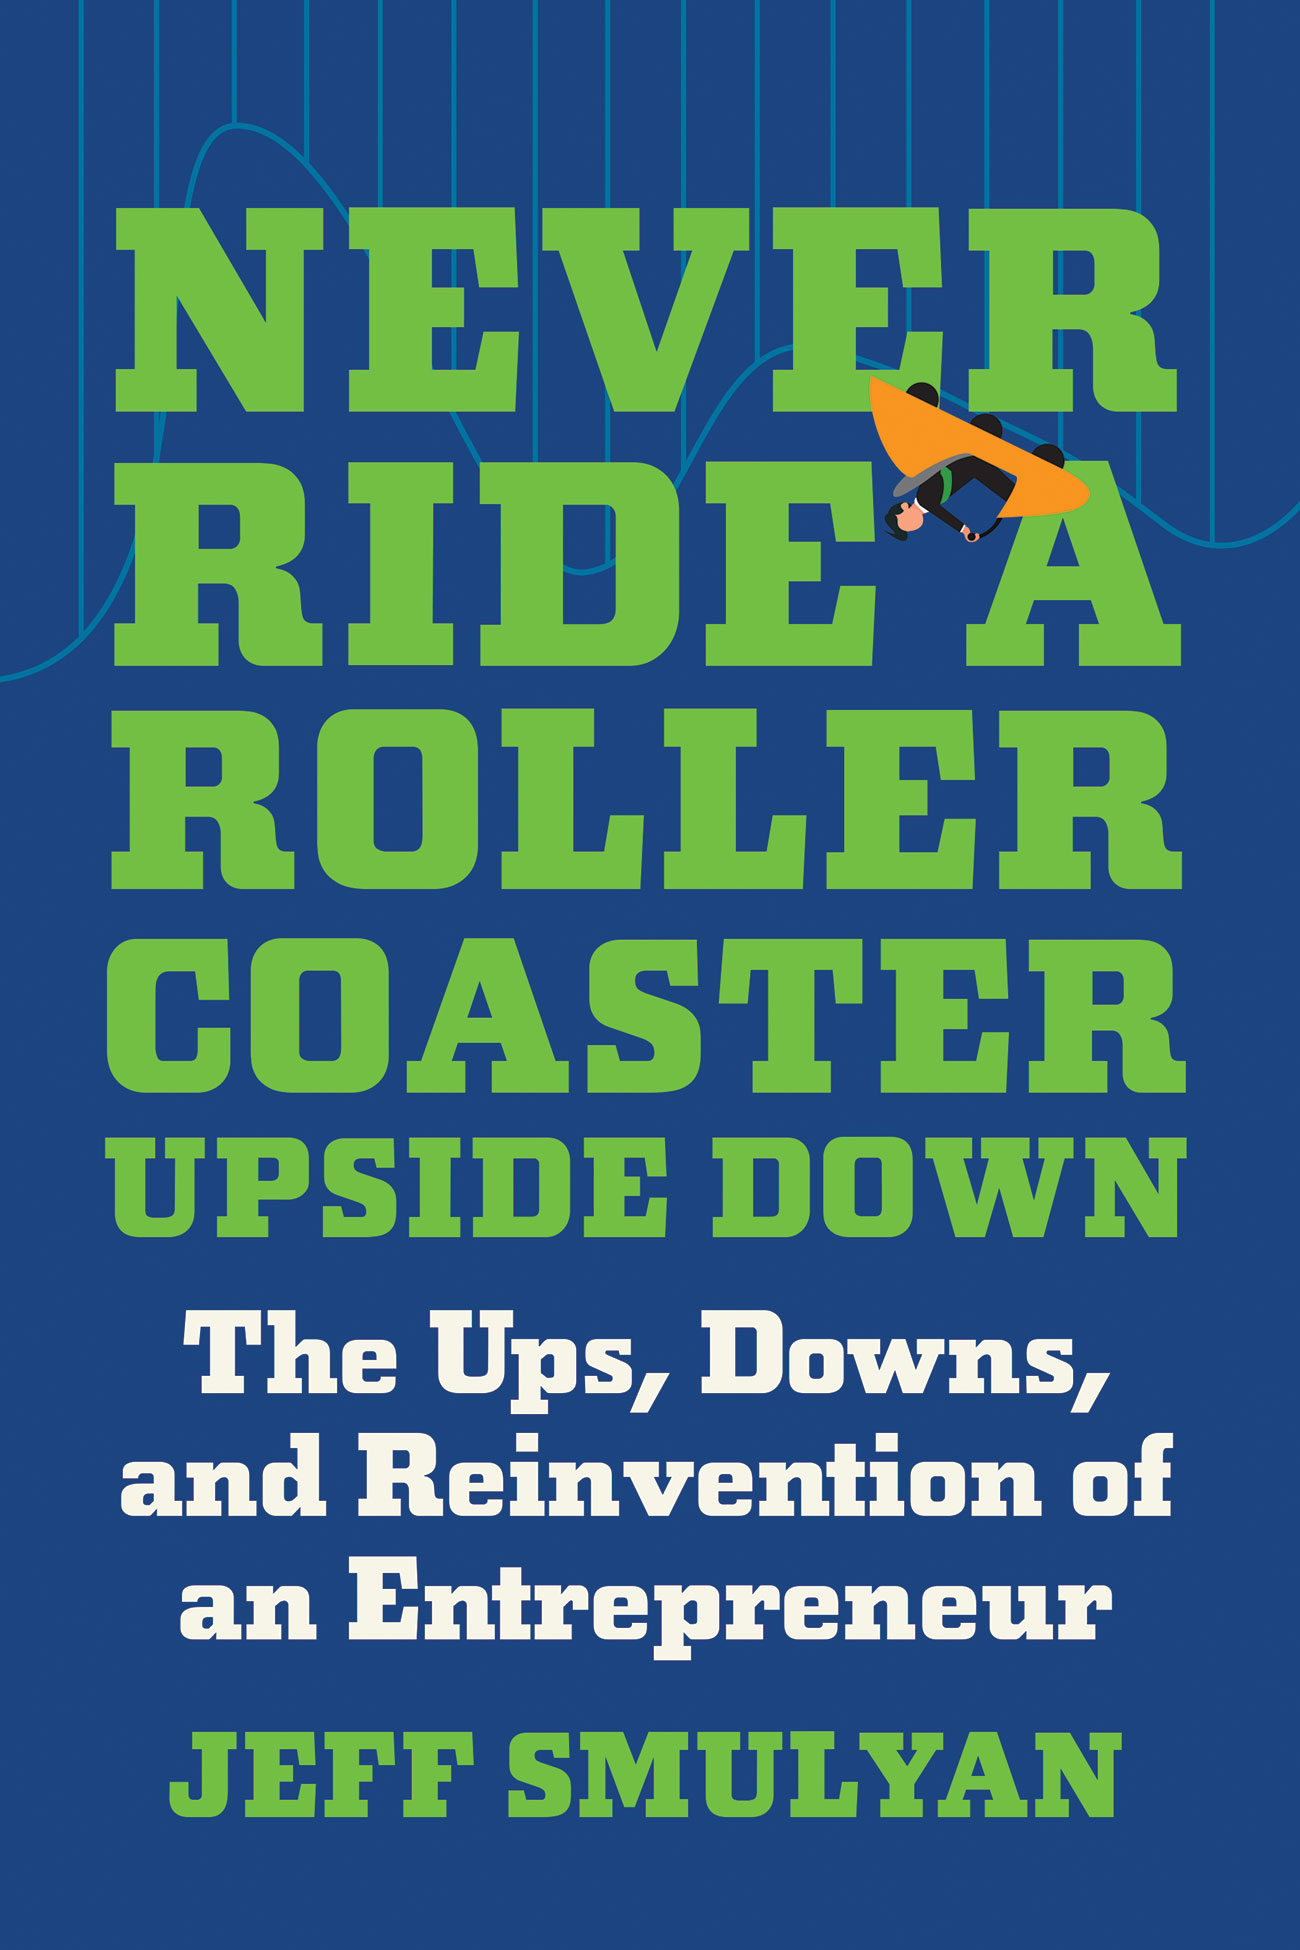 NEVER RIDE A ROLLER COASTER UPSIDE DOWN by Jeff Smulyan